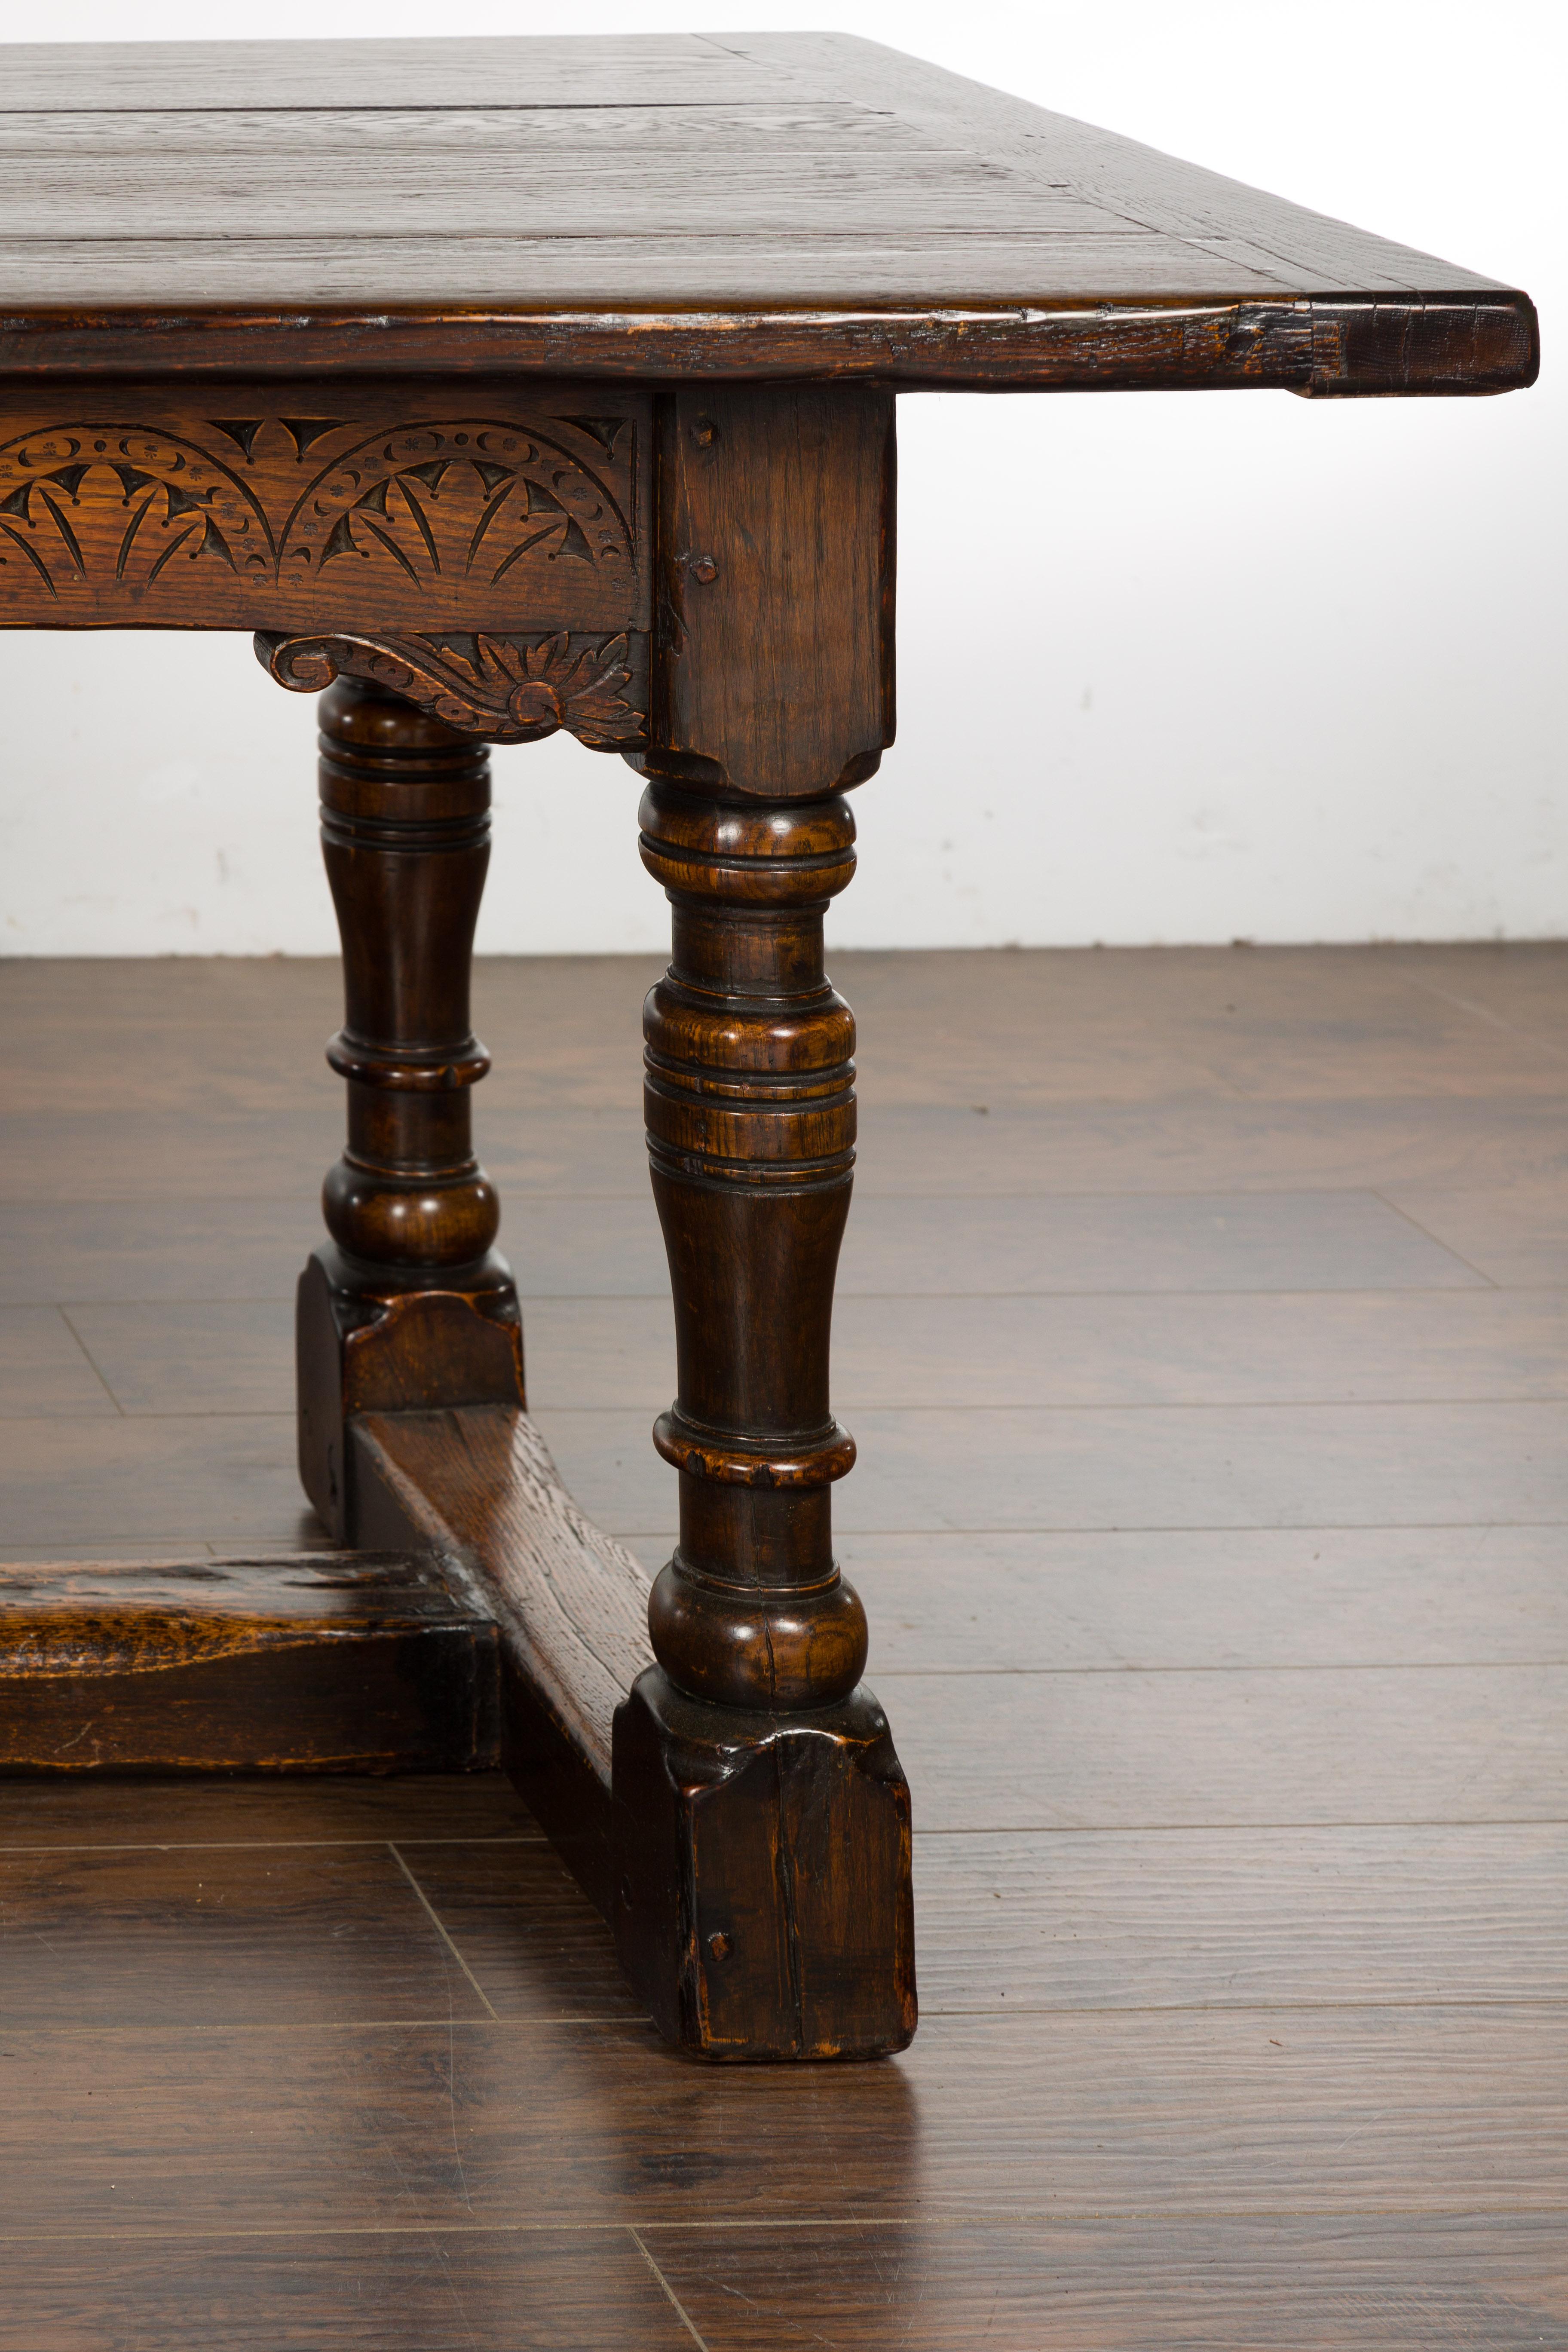 19th Century English Oak Table with Carved Apron and Turned Legs For Sale 4